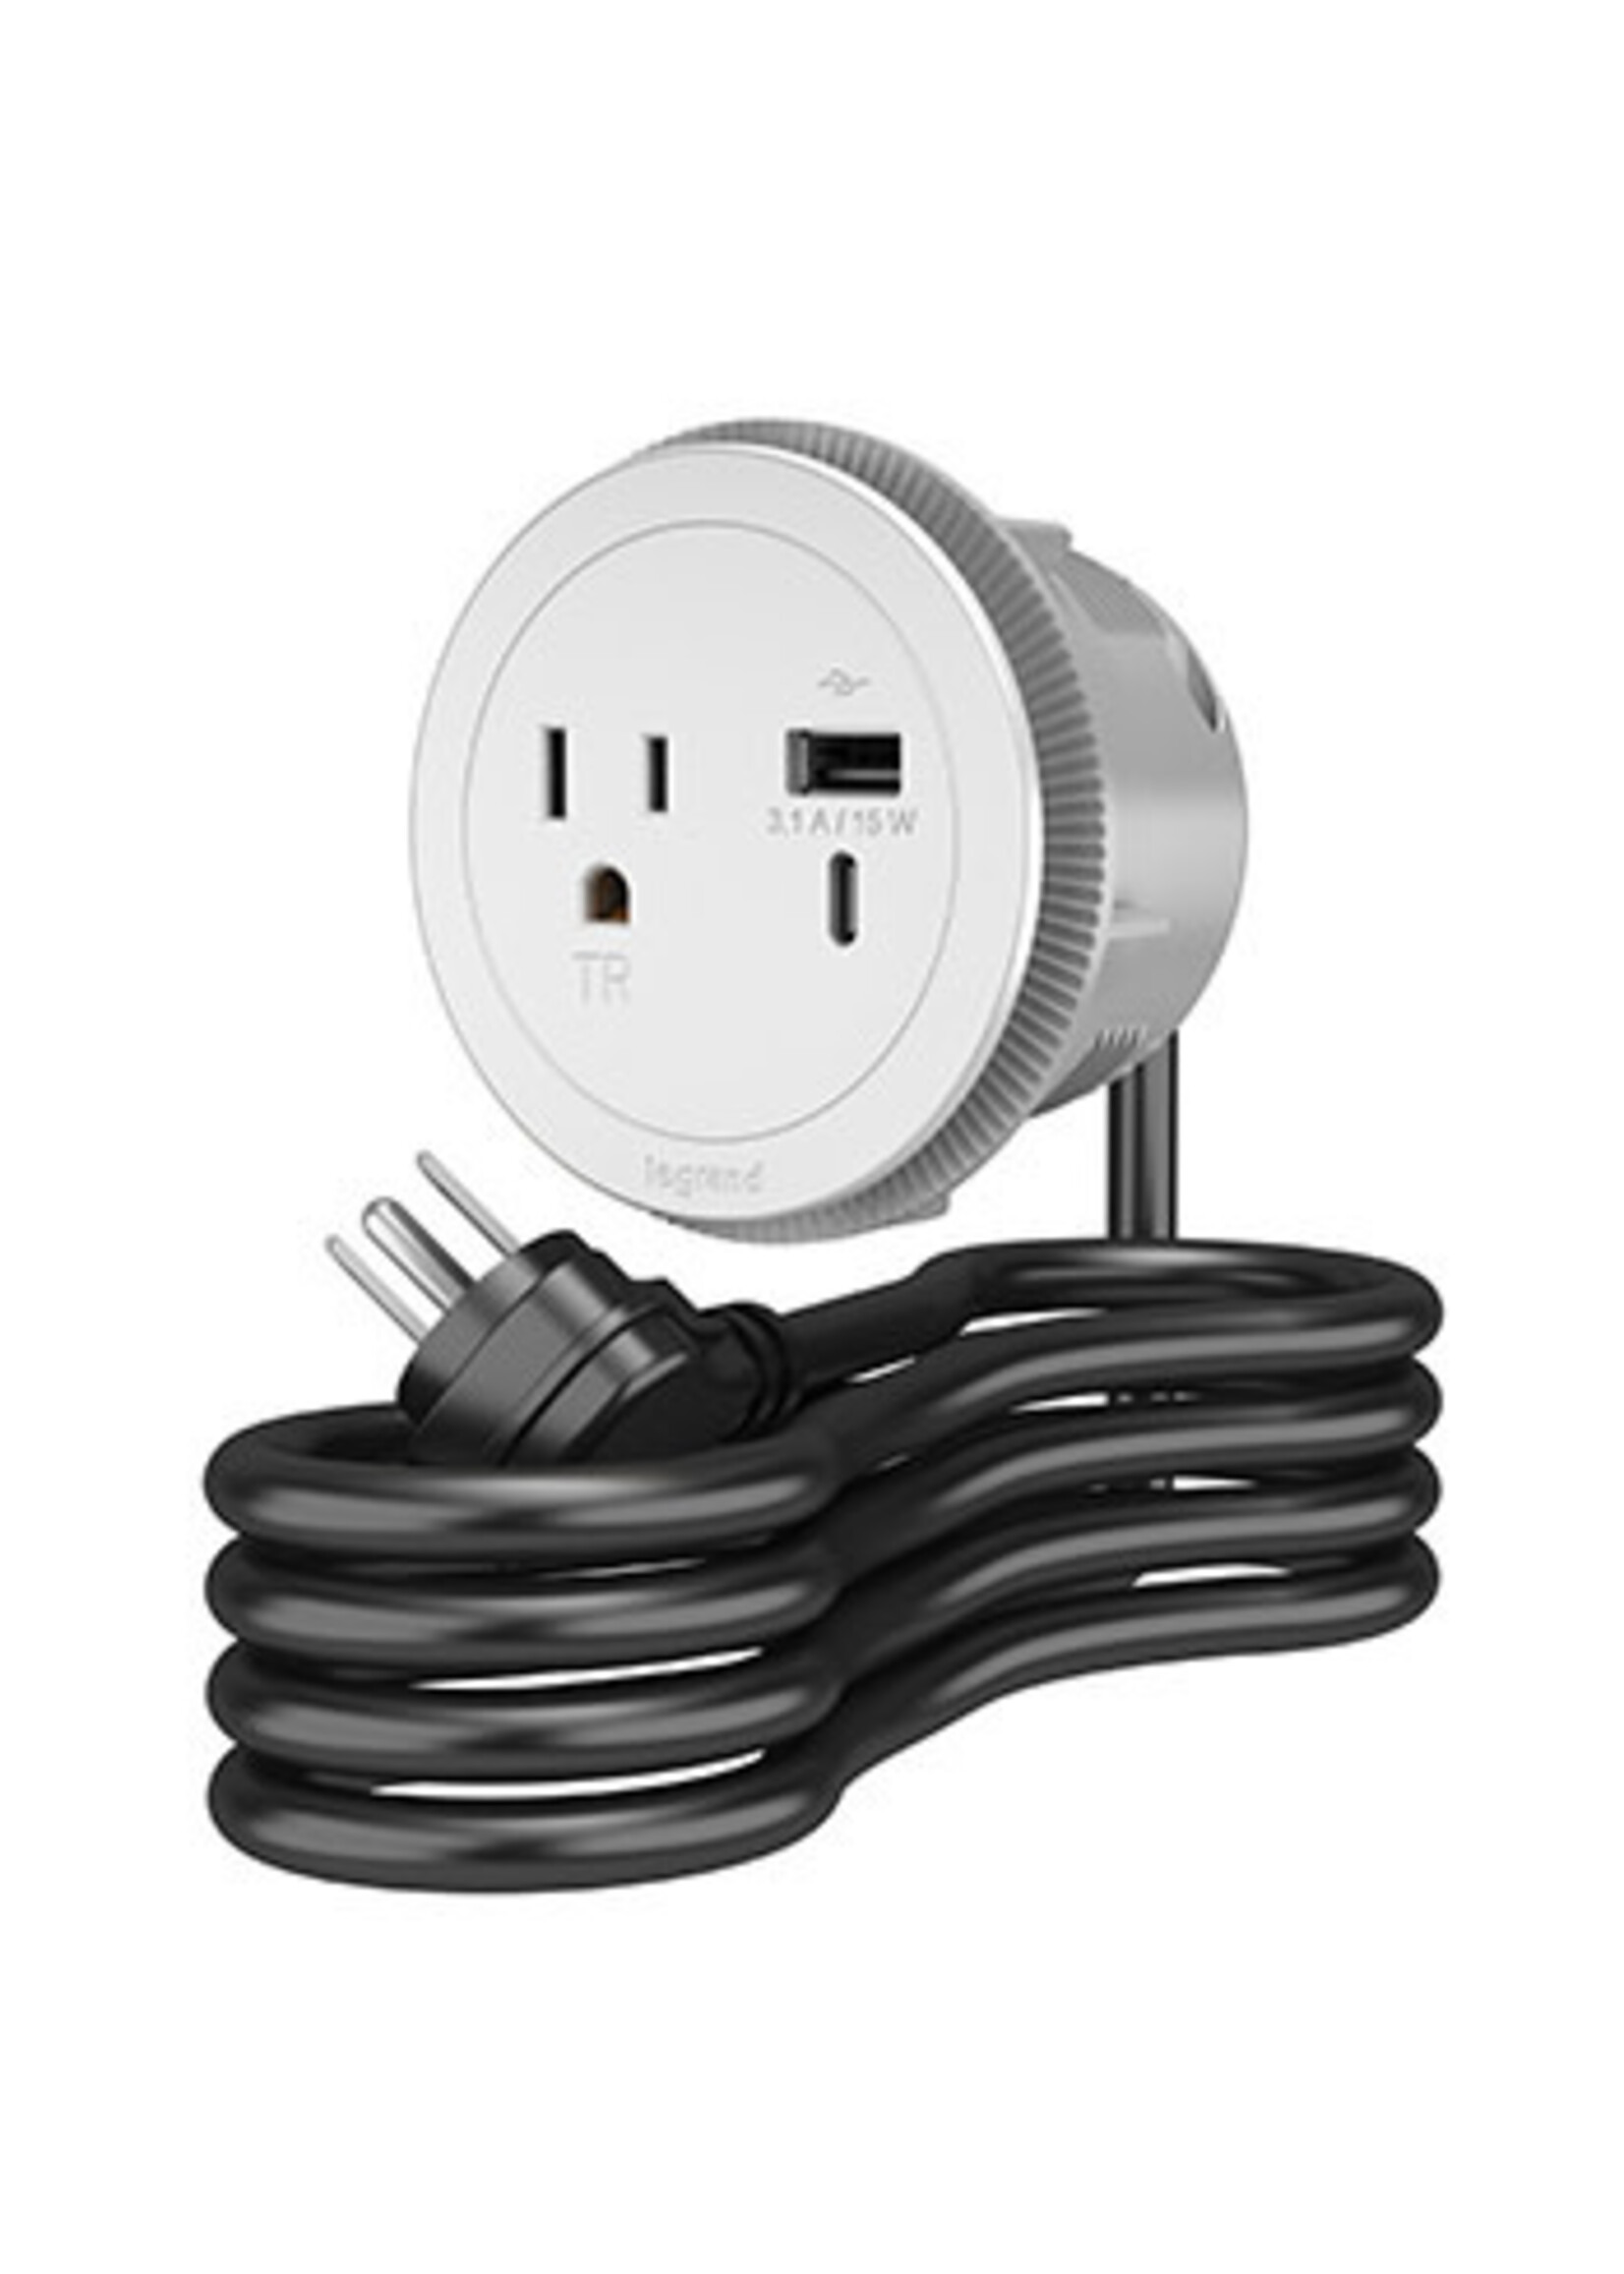 LEGRAND / WIREMOLD RFPCRUAUC-WH (White) ROUND FURNITURE POWER CENTERS 6' CABLE